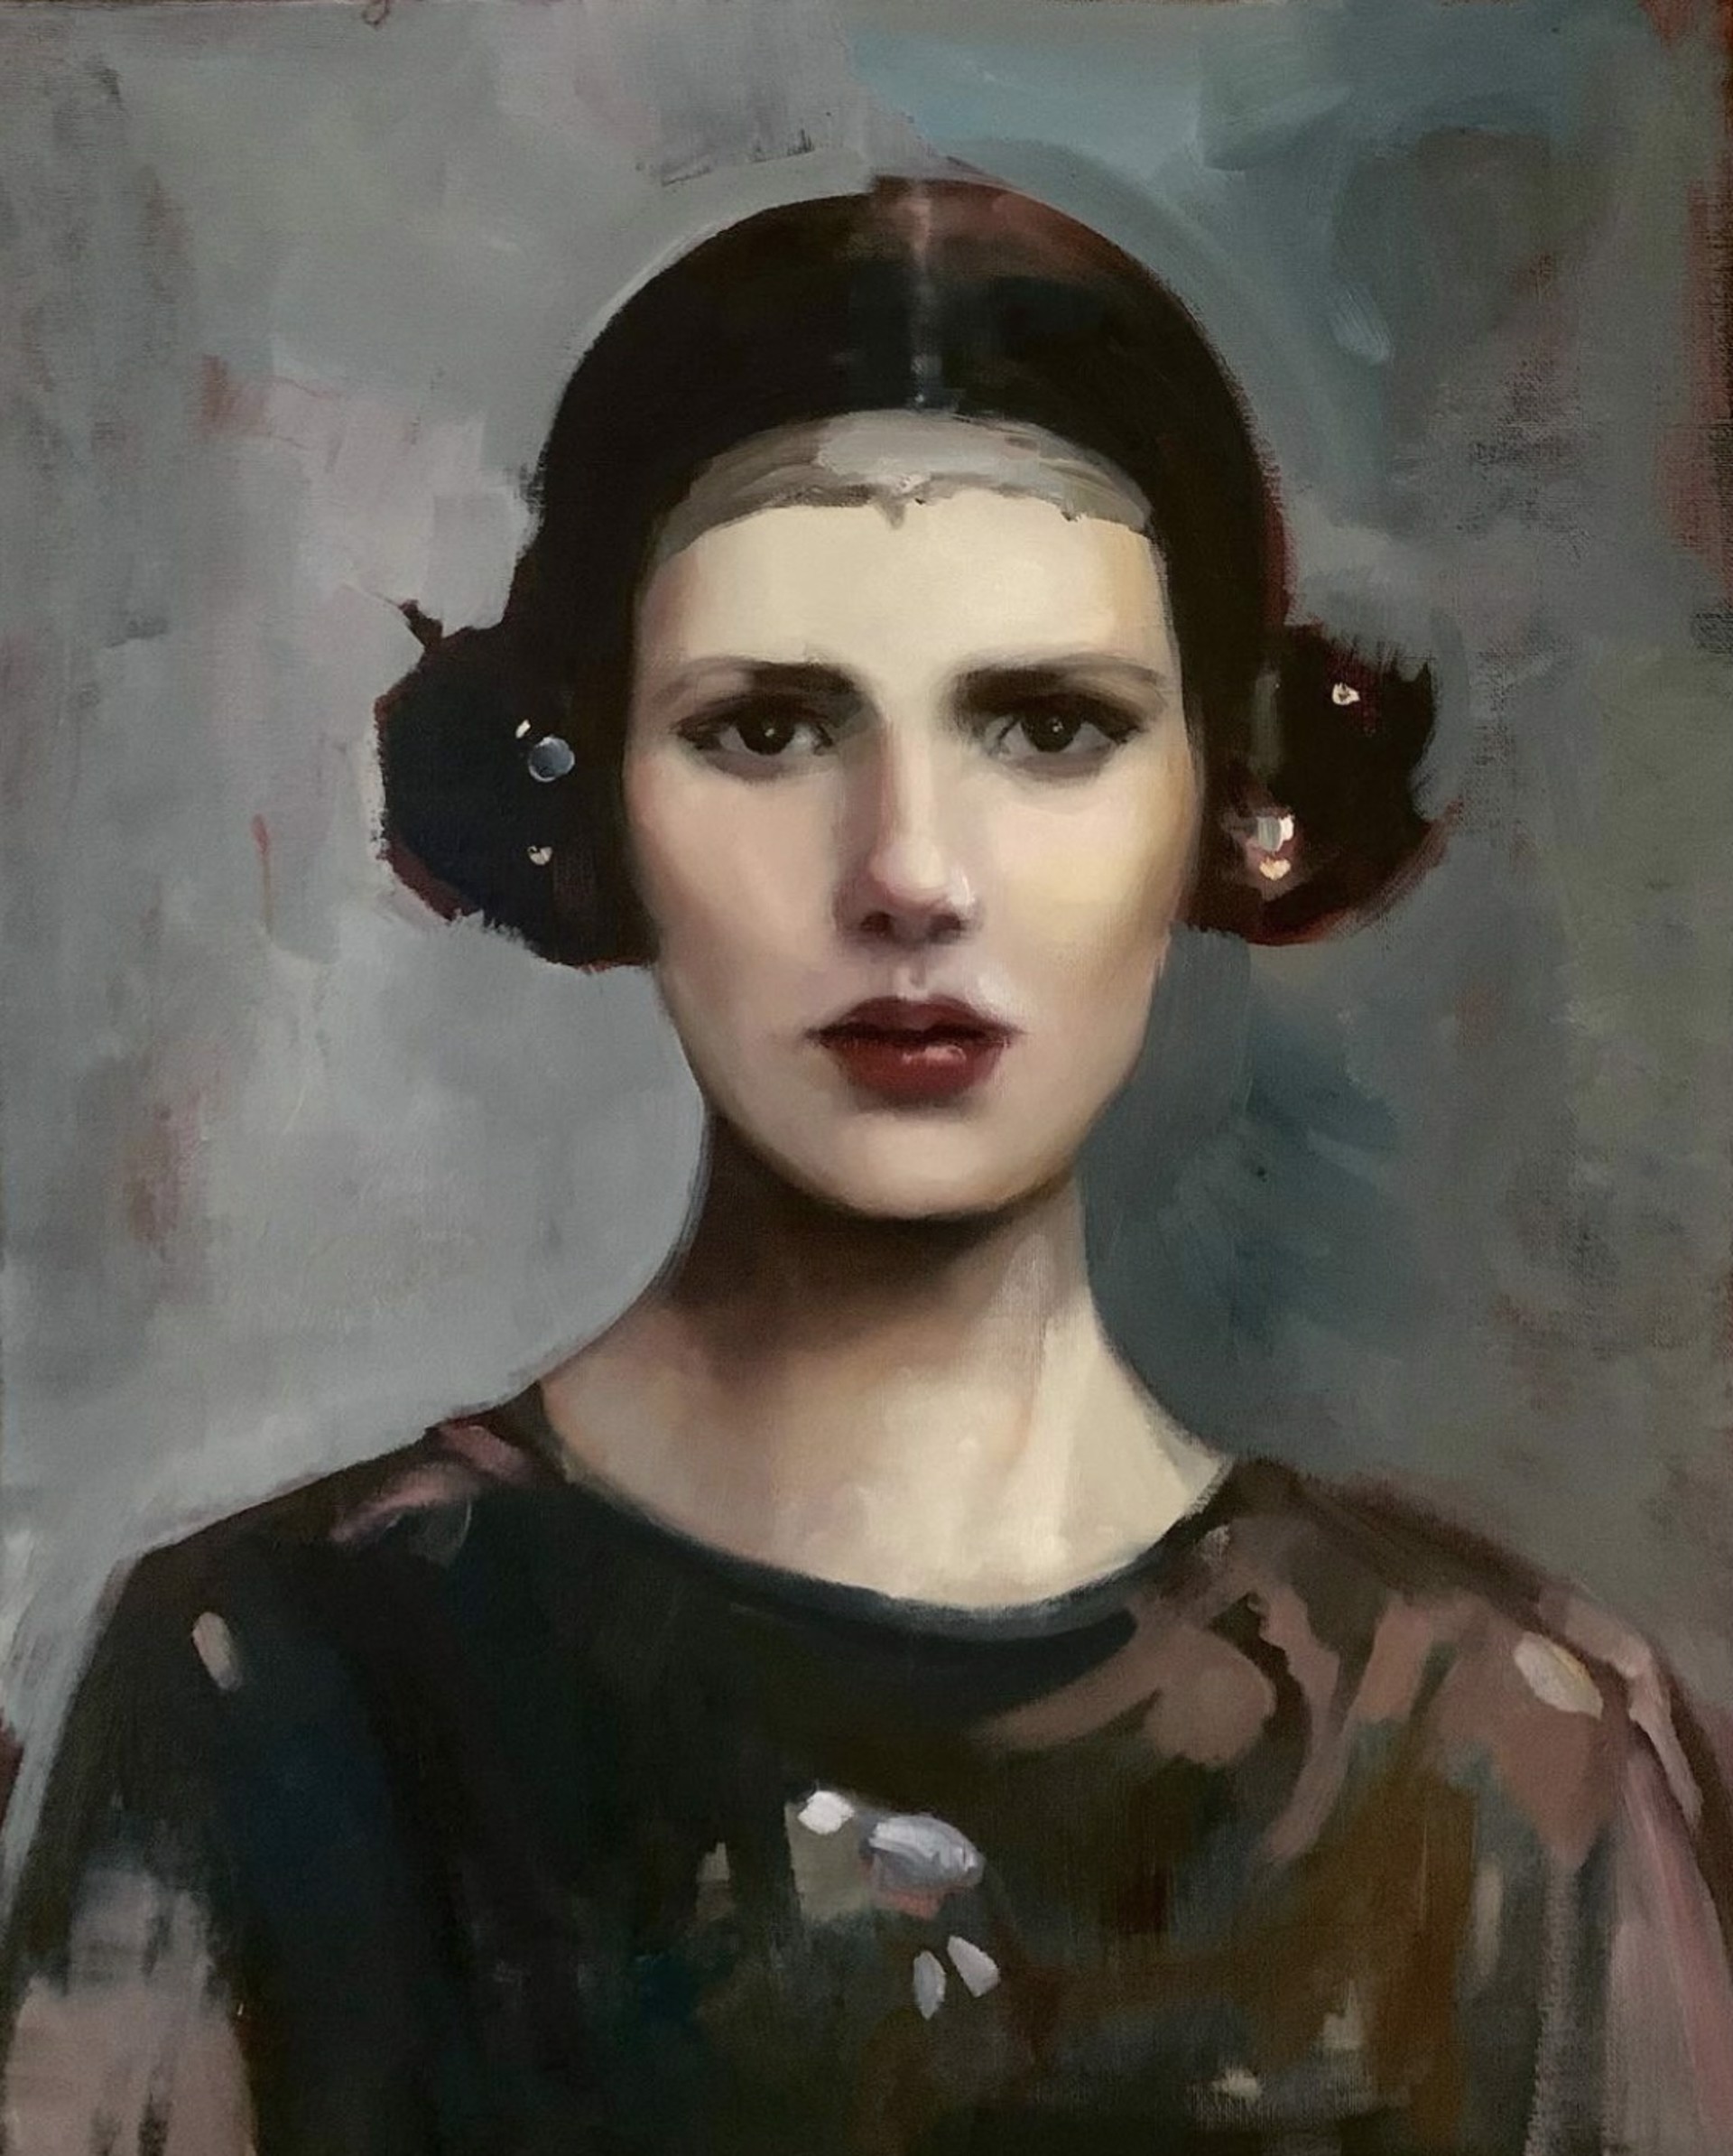 Sister of Leia by Donna Hughes